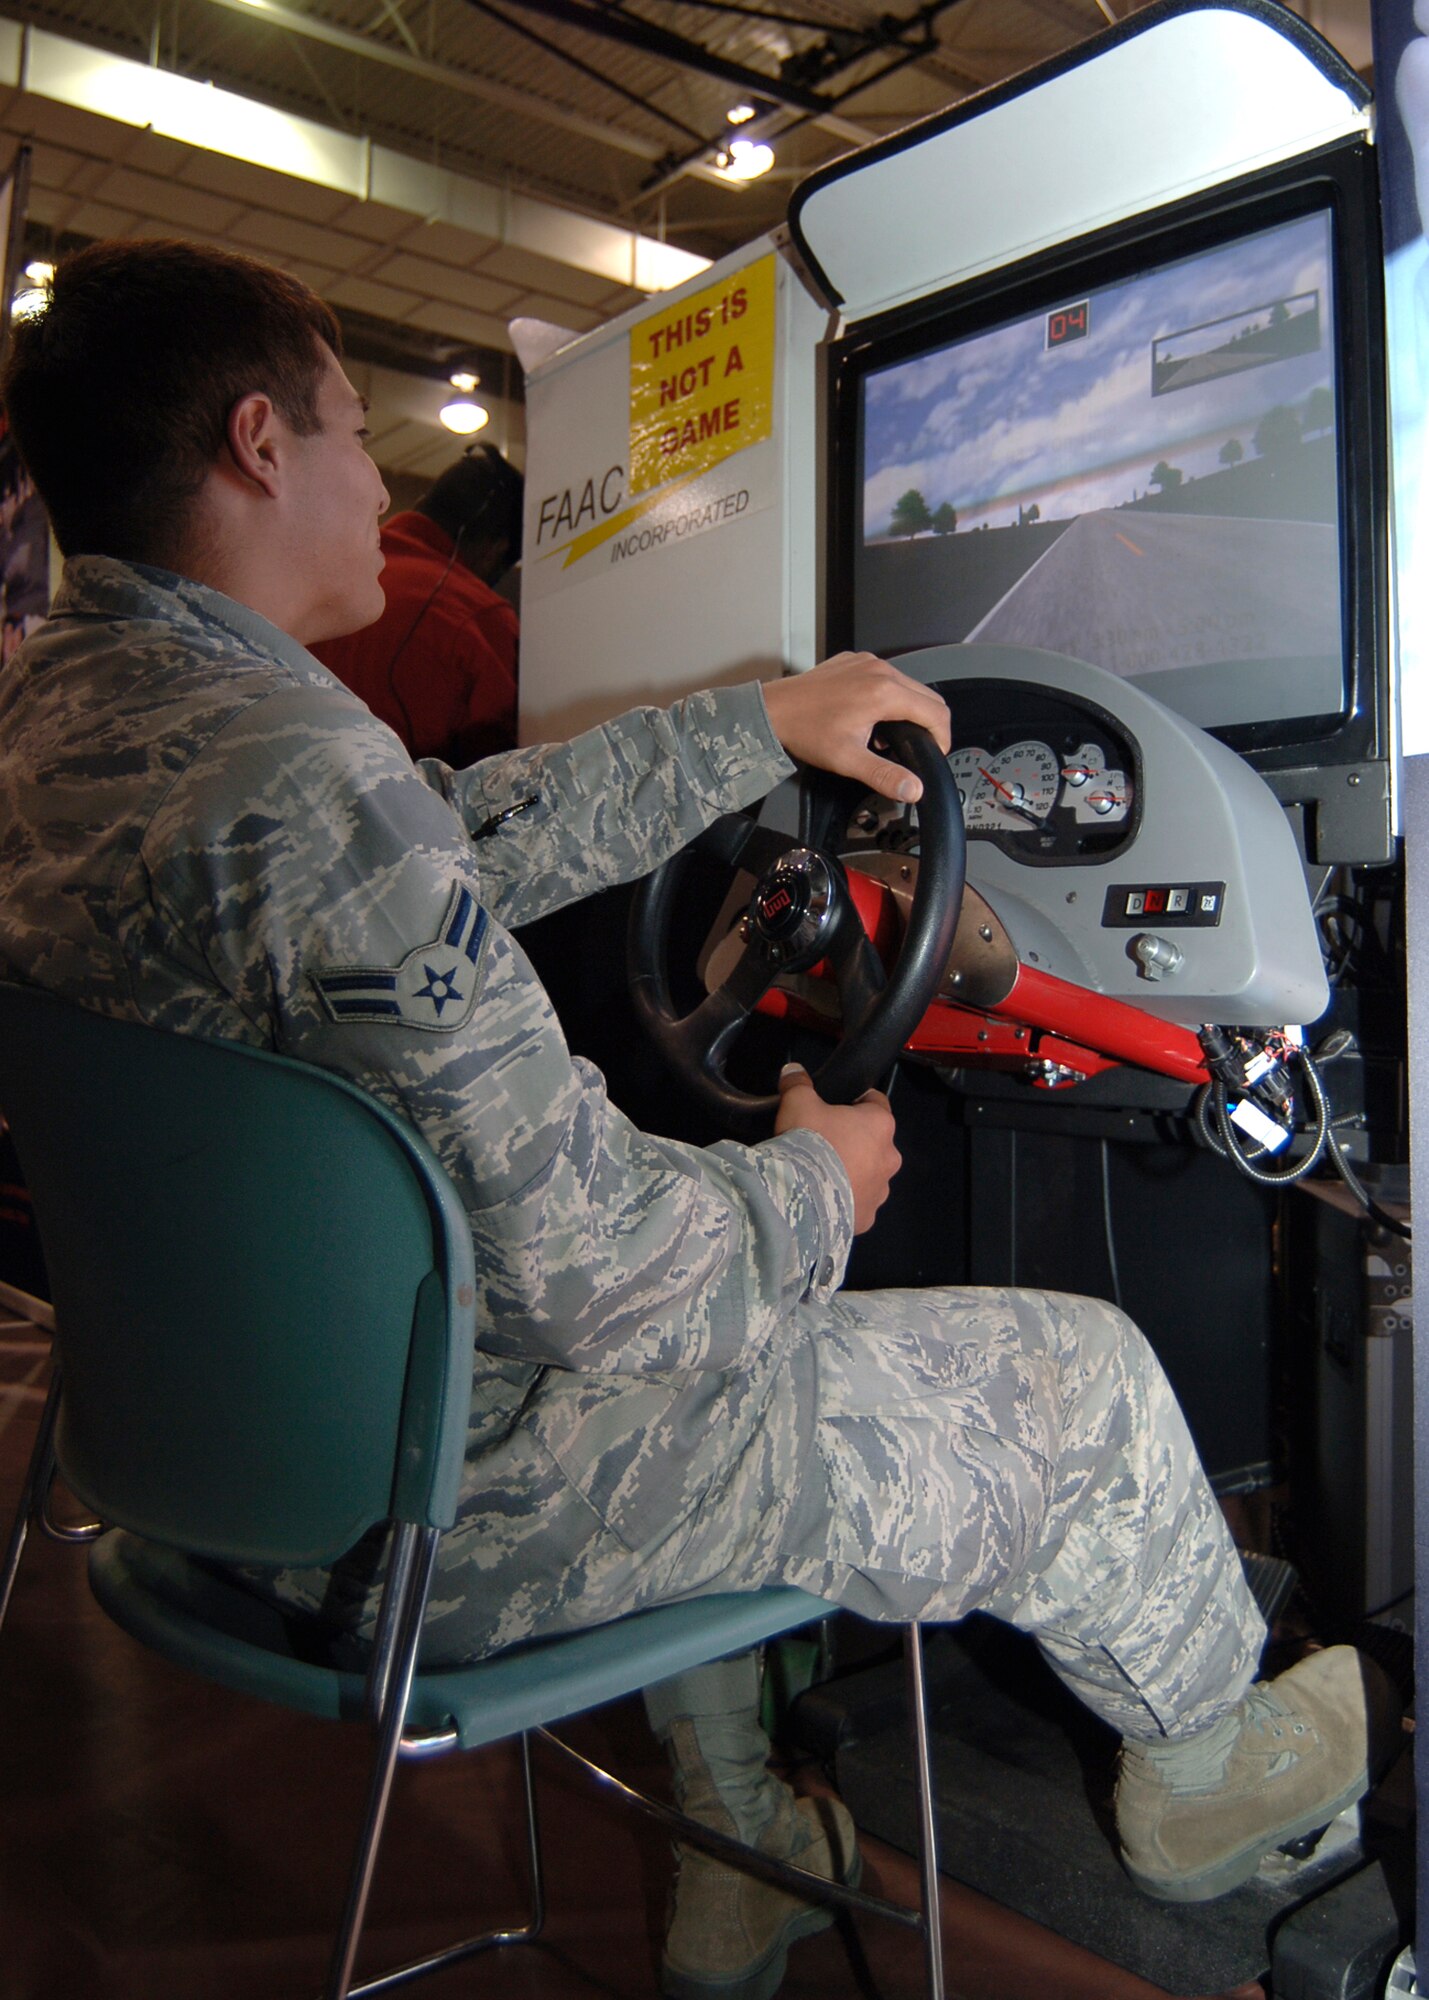 MCCONNELL AIR FORCE BASE, Kan. -- Airman 1st Class Christopher Calderon, 22nd Aircraft Maintenance Squadron, drives a car simulator that help eyes adjust to the drunken driving simulator, Sept. 30. Many of the Airmen that attended the “Save a Life” tour got a chance to drive the drunk driving simulator, watch videos of real life stories of people that were affected by drunk driving, and listen to the tour manager speak about the importance of our actions on the road. (Photo by Airman 1st Class Maria Ruiz)